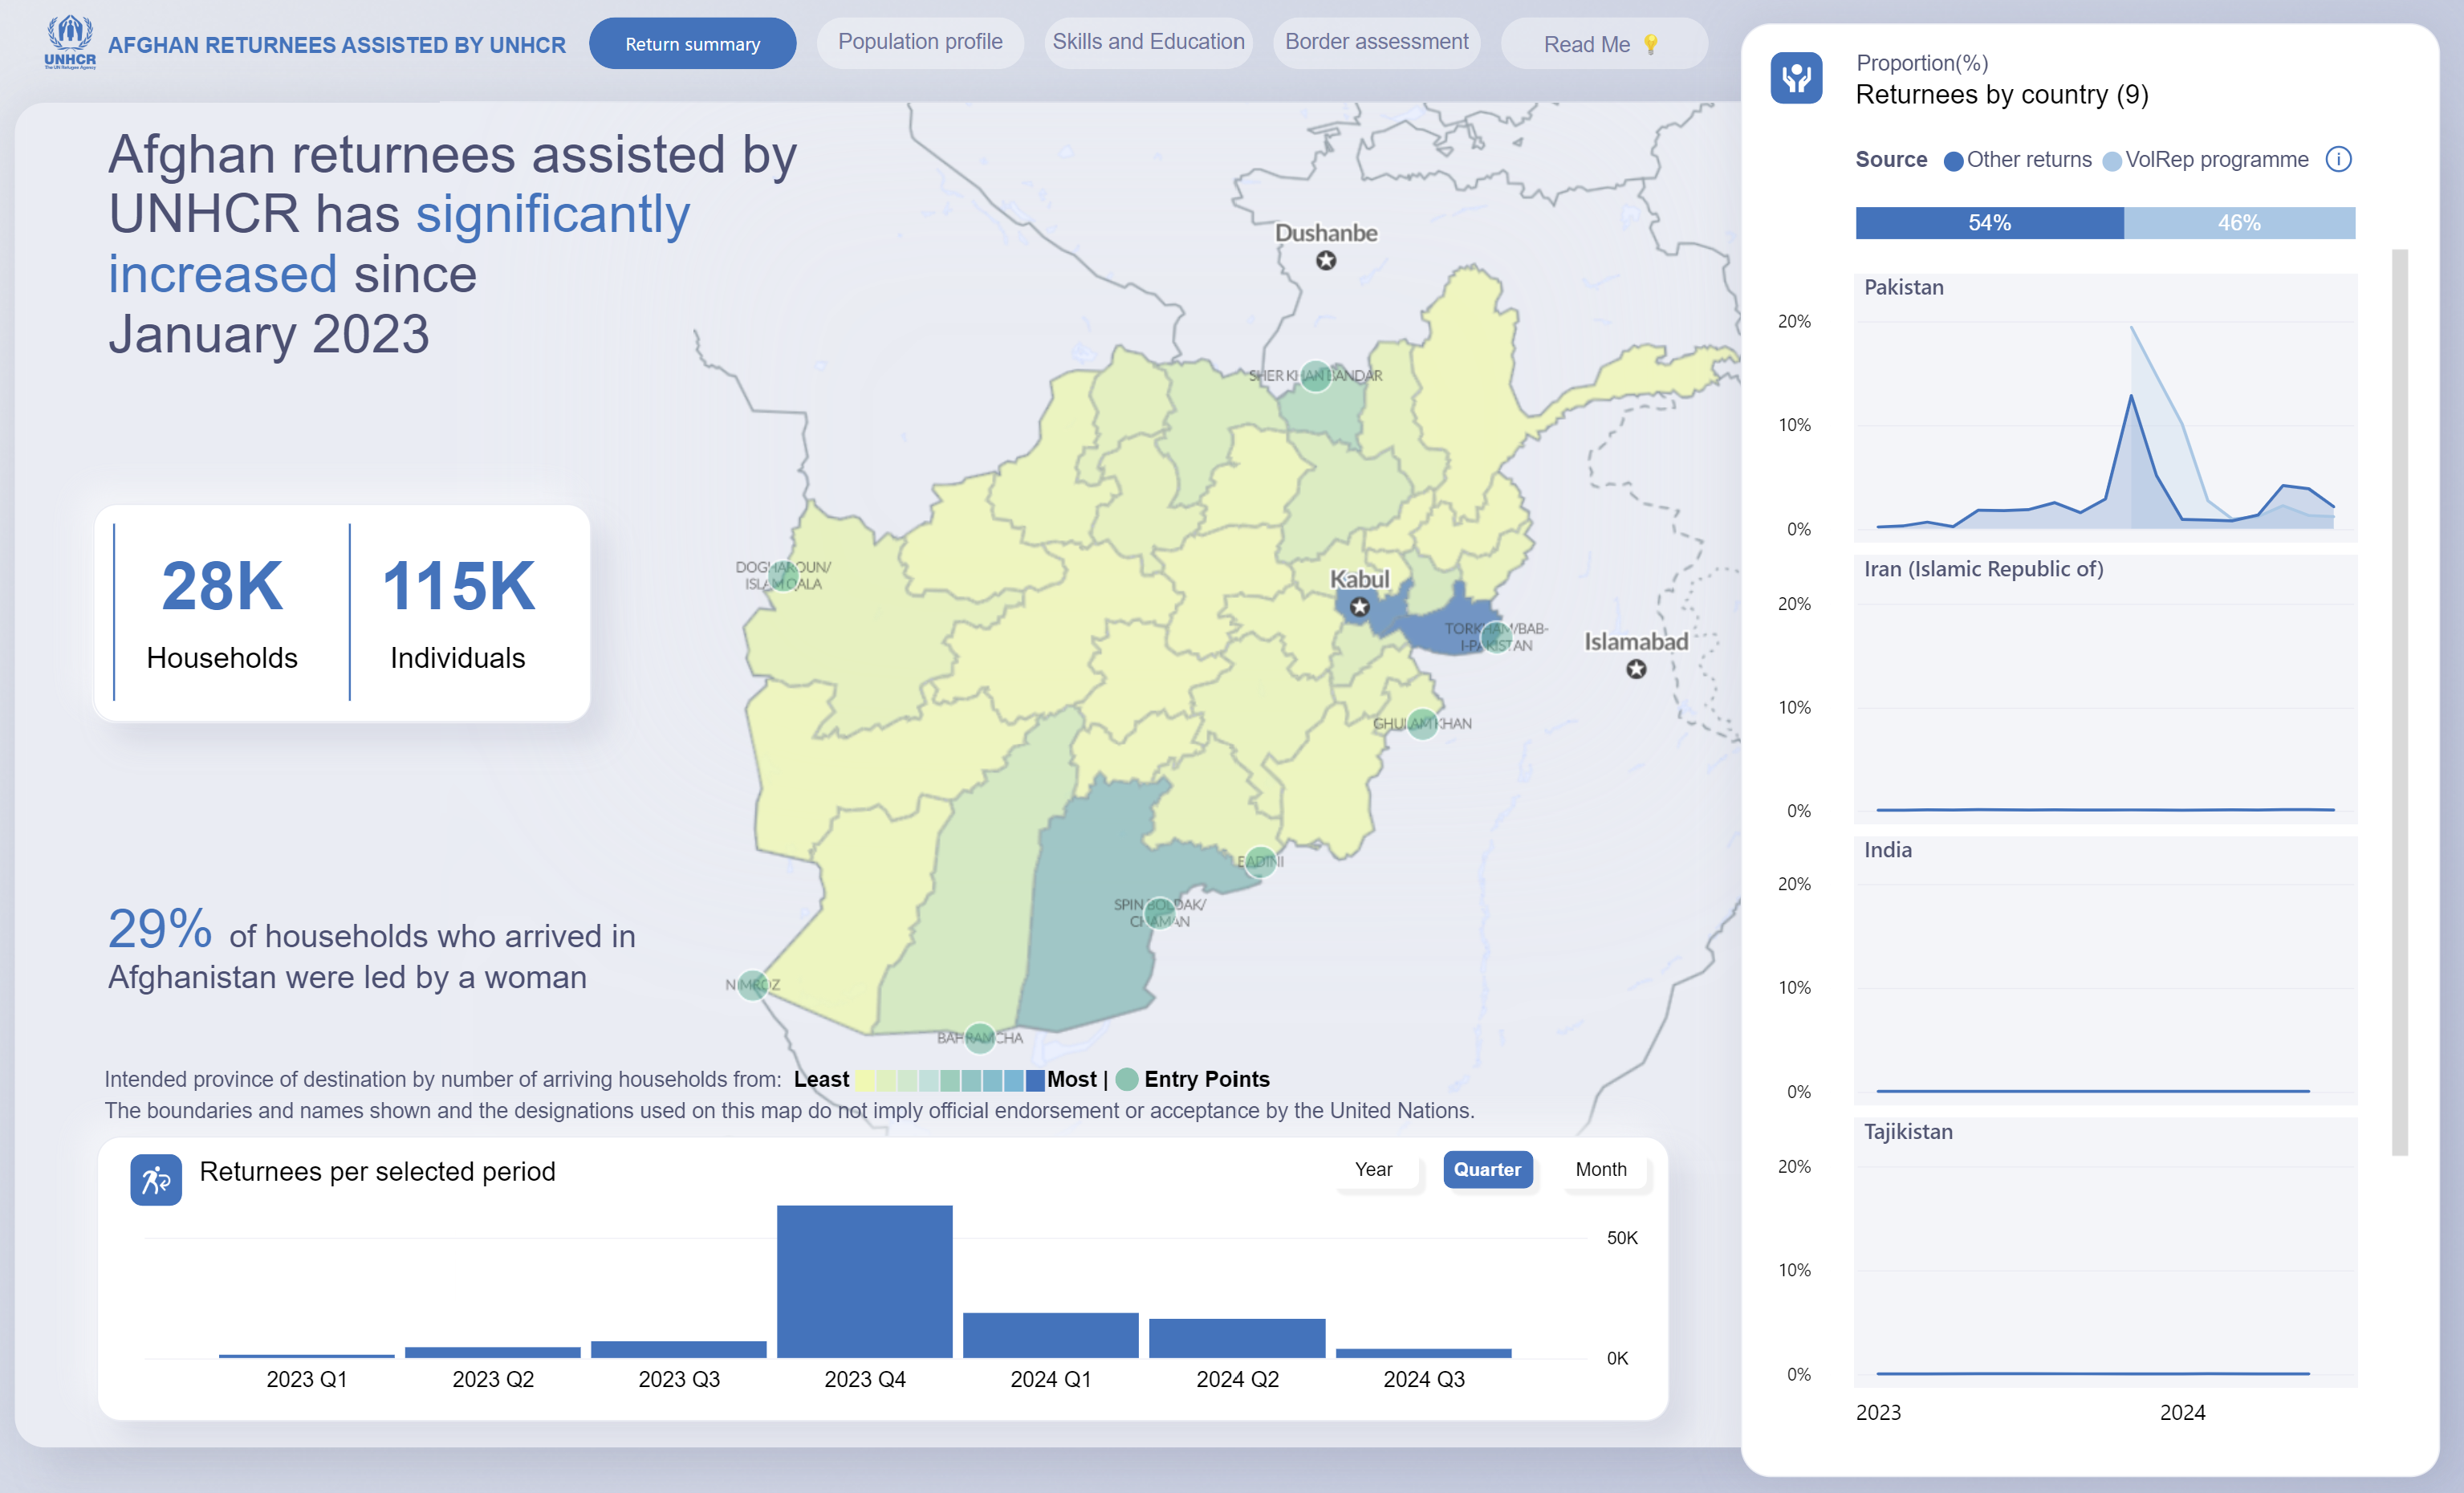 Afghan Returnees Assisted by UNHCR Dashboard